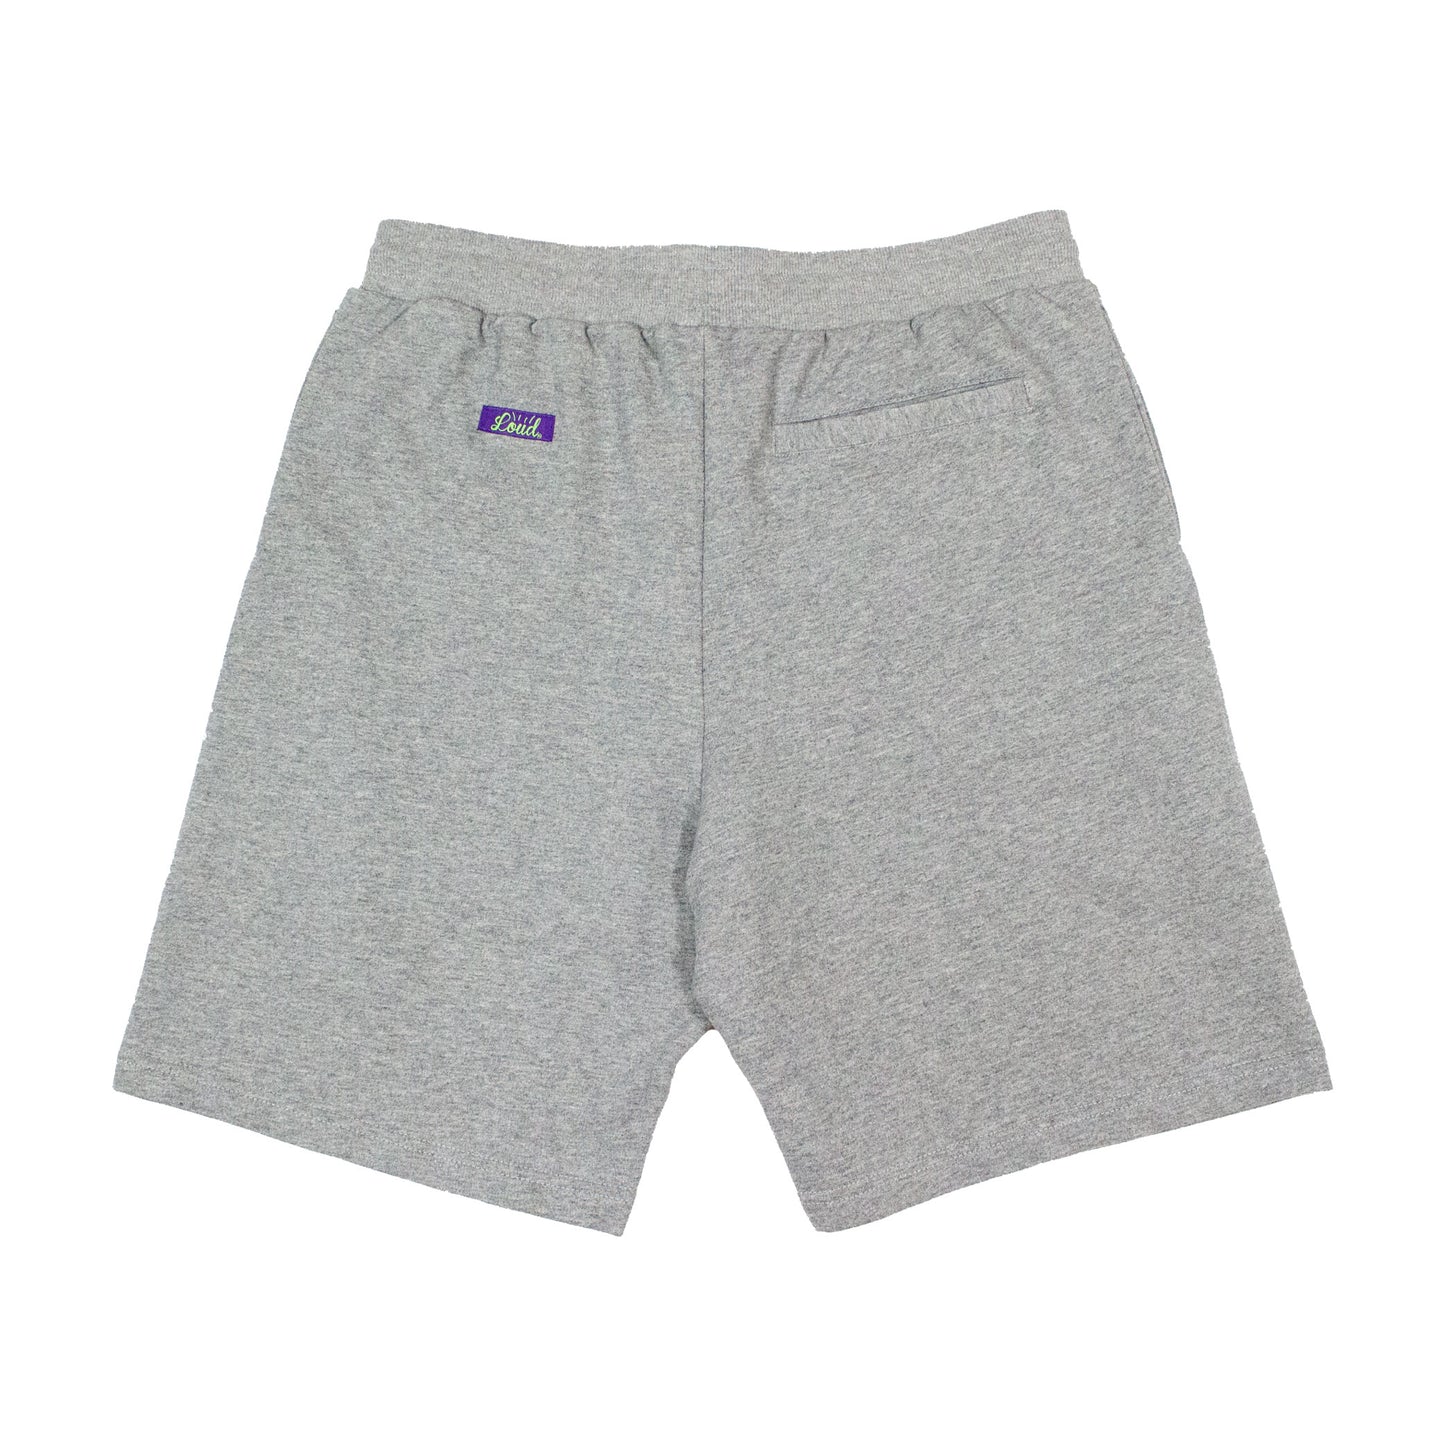 Loud French Terry Shorts - Heather Grey/USA